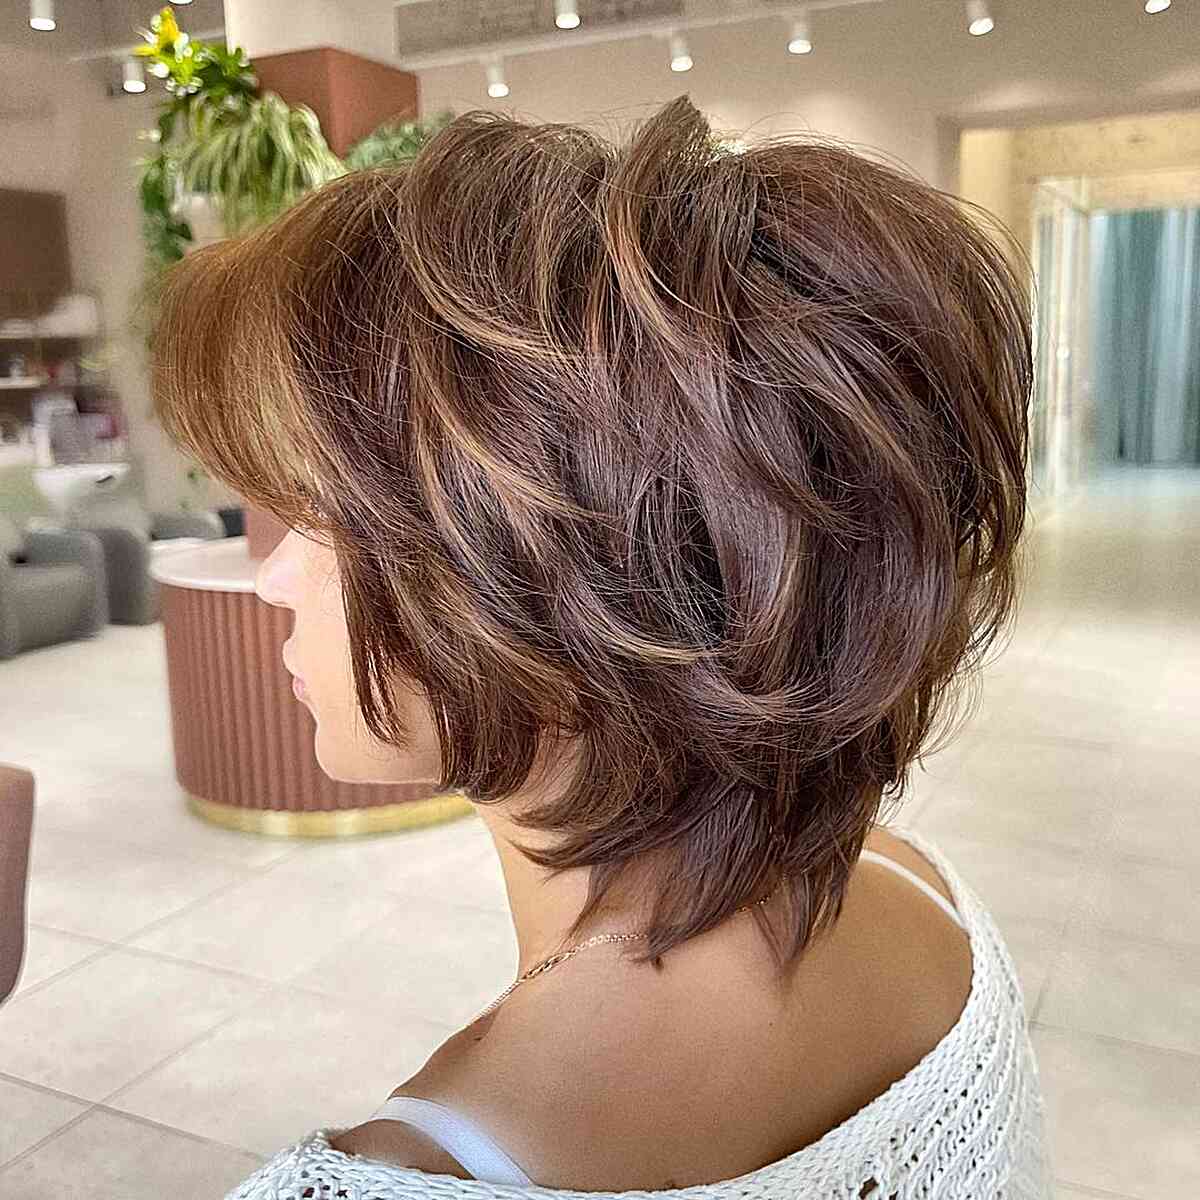 Bixie Cut with a Brown Balayage and Copper Tones